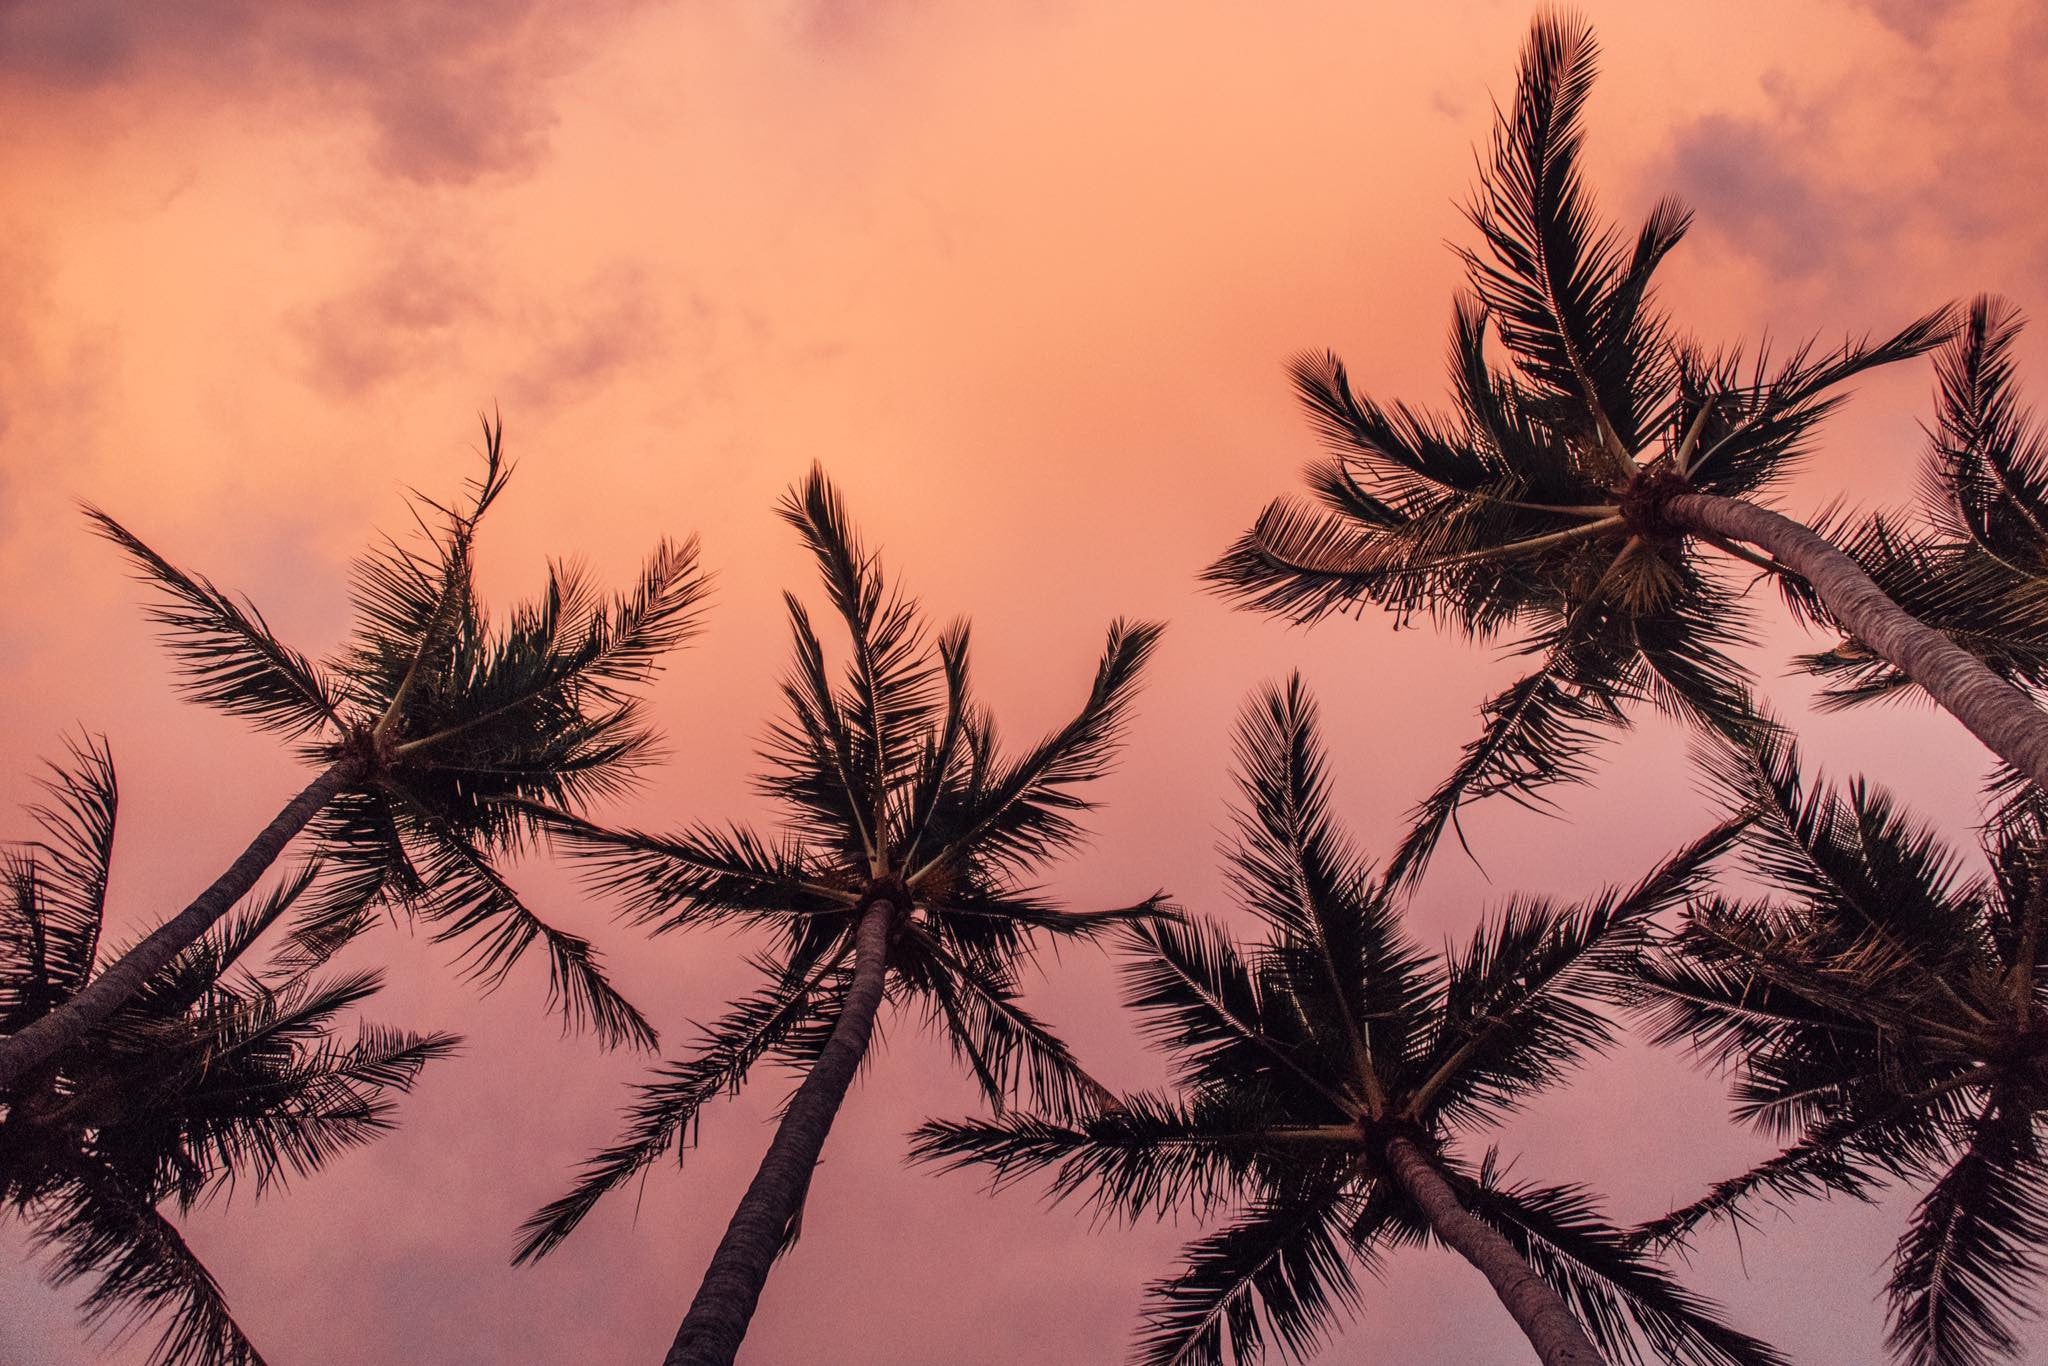 Palm trees against a cotton candy pink sunset sky in Costa Rica. Photographed by Kristen M. Brown Samba to the Sea.